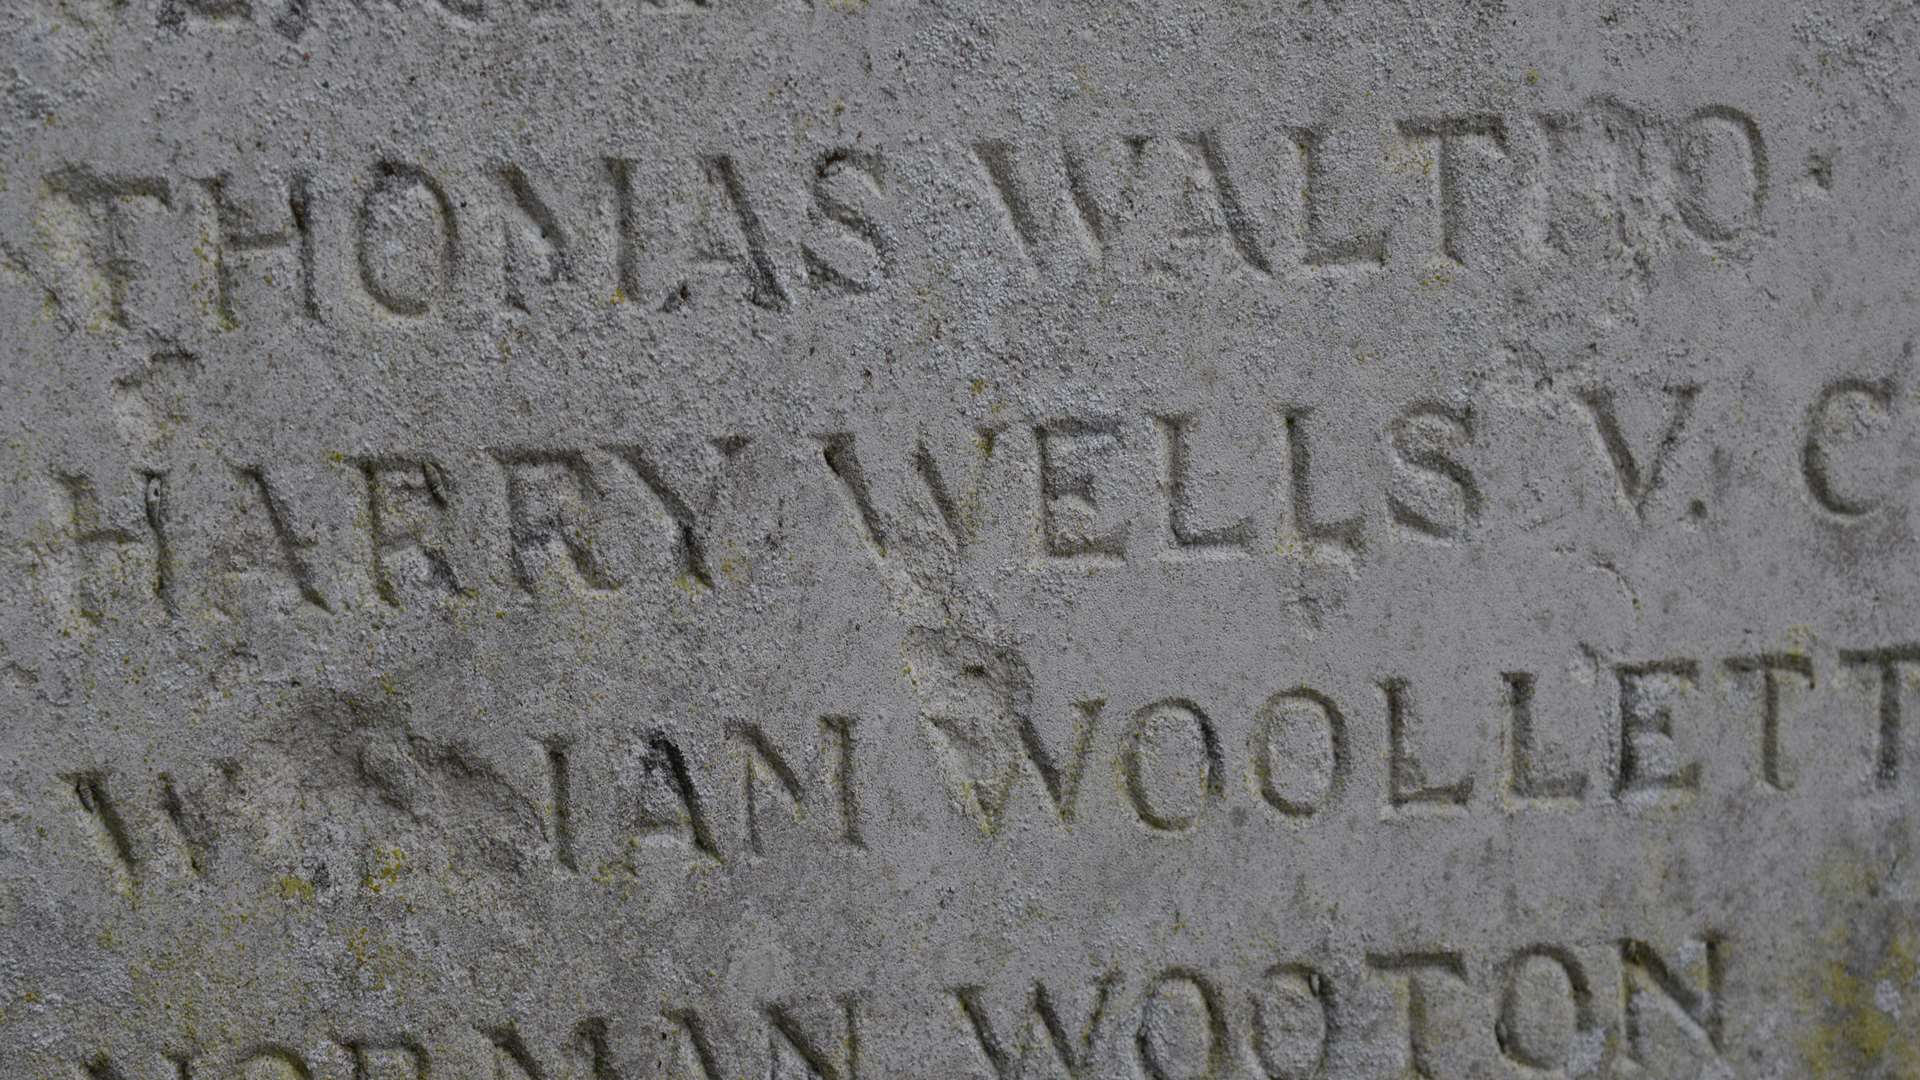 Harry Wells VC inscription on the war memorial at St Martin's Church in Herne